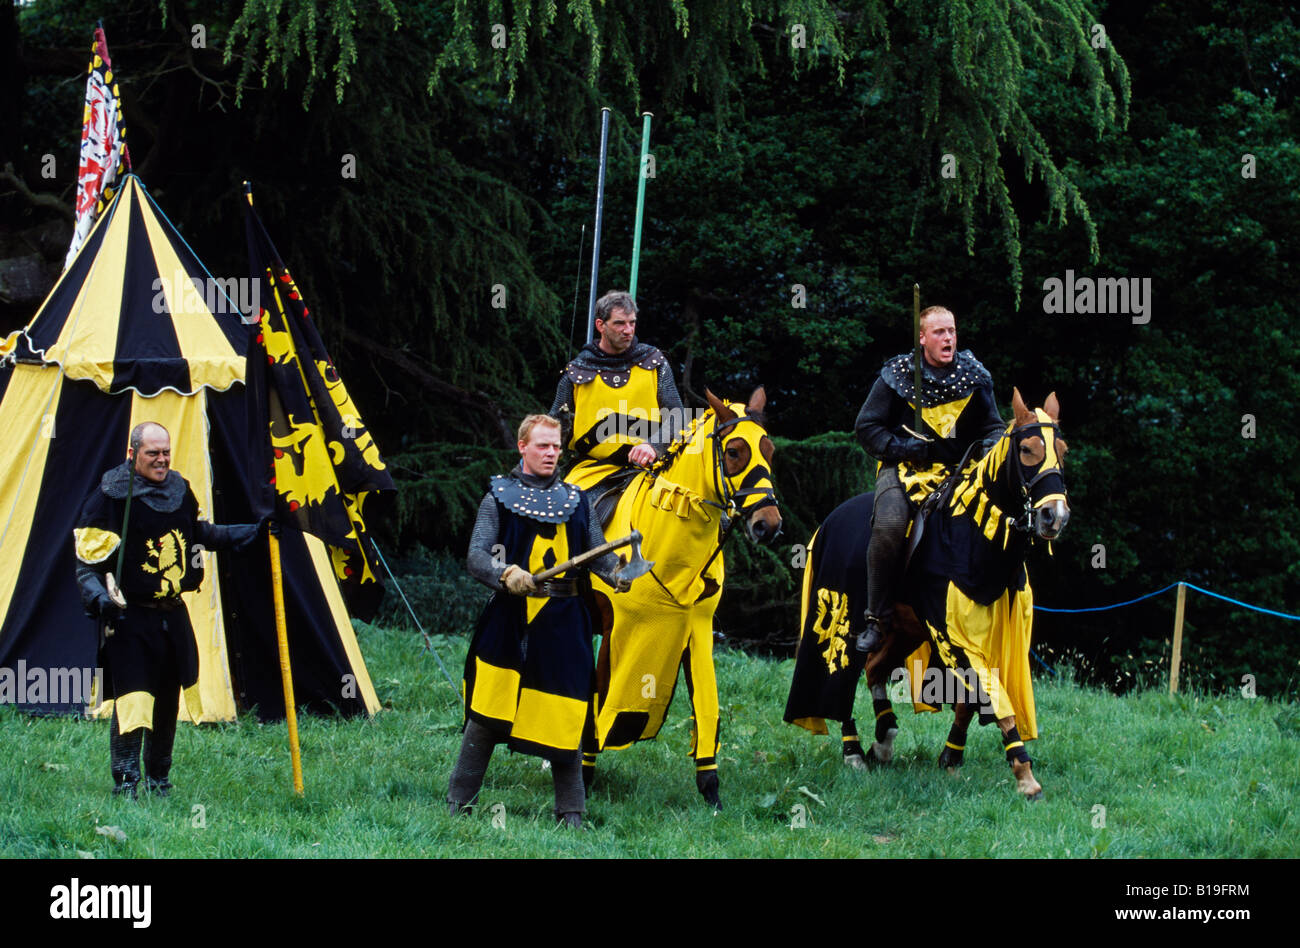 England, Leicestershire, Belvoir Castle. A jousting tournament at the english stately home of Belvoir Castle. Stock Photo